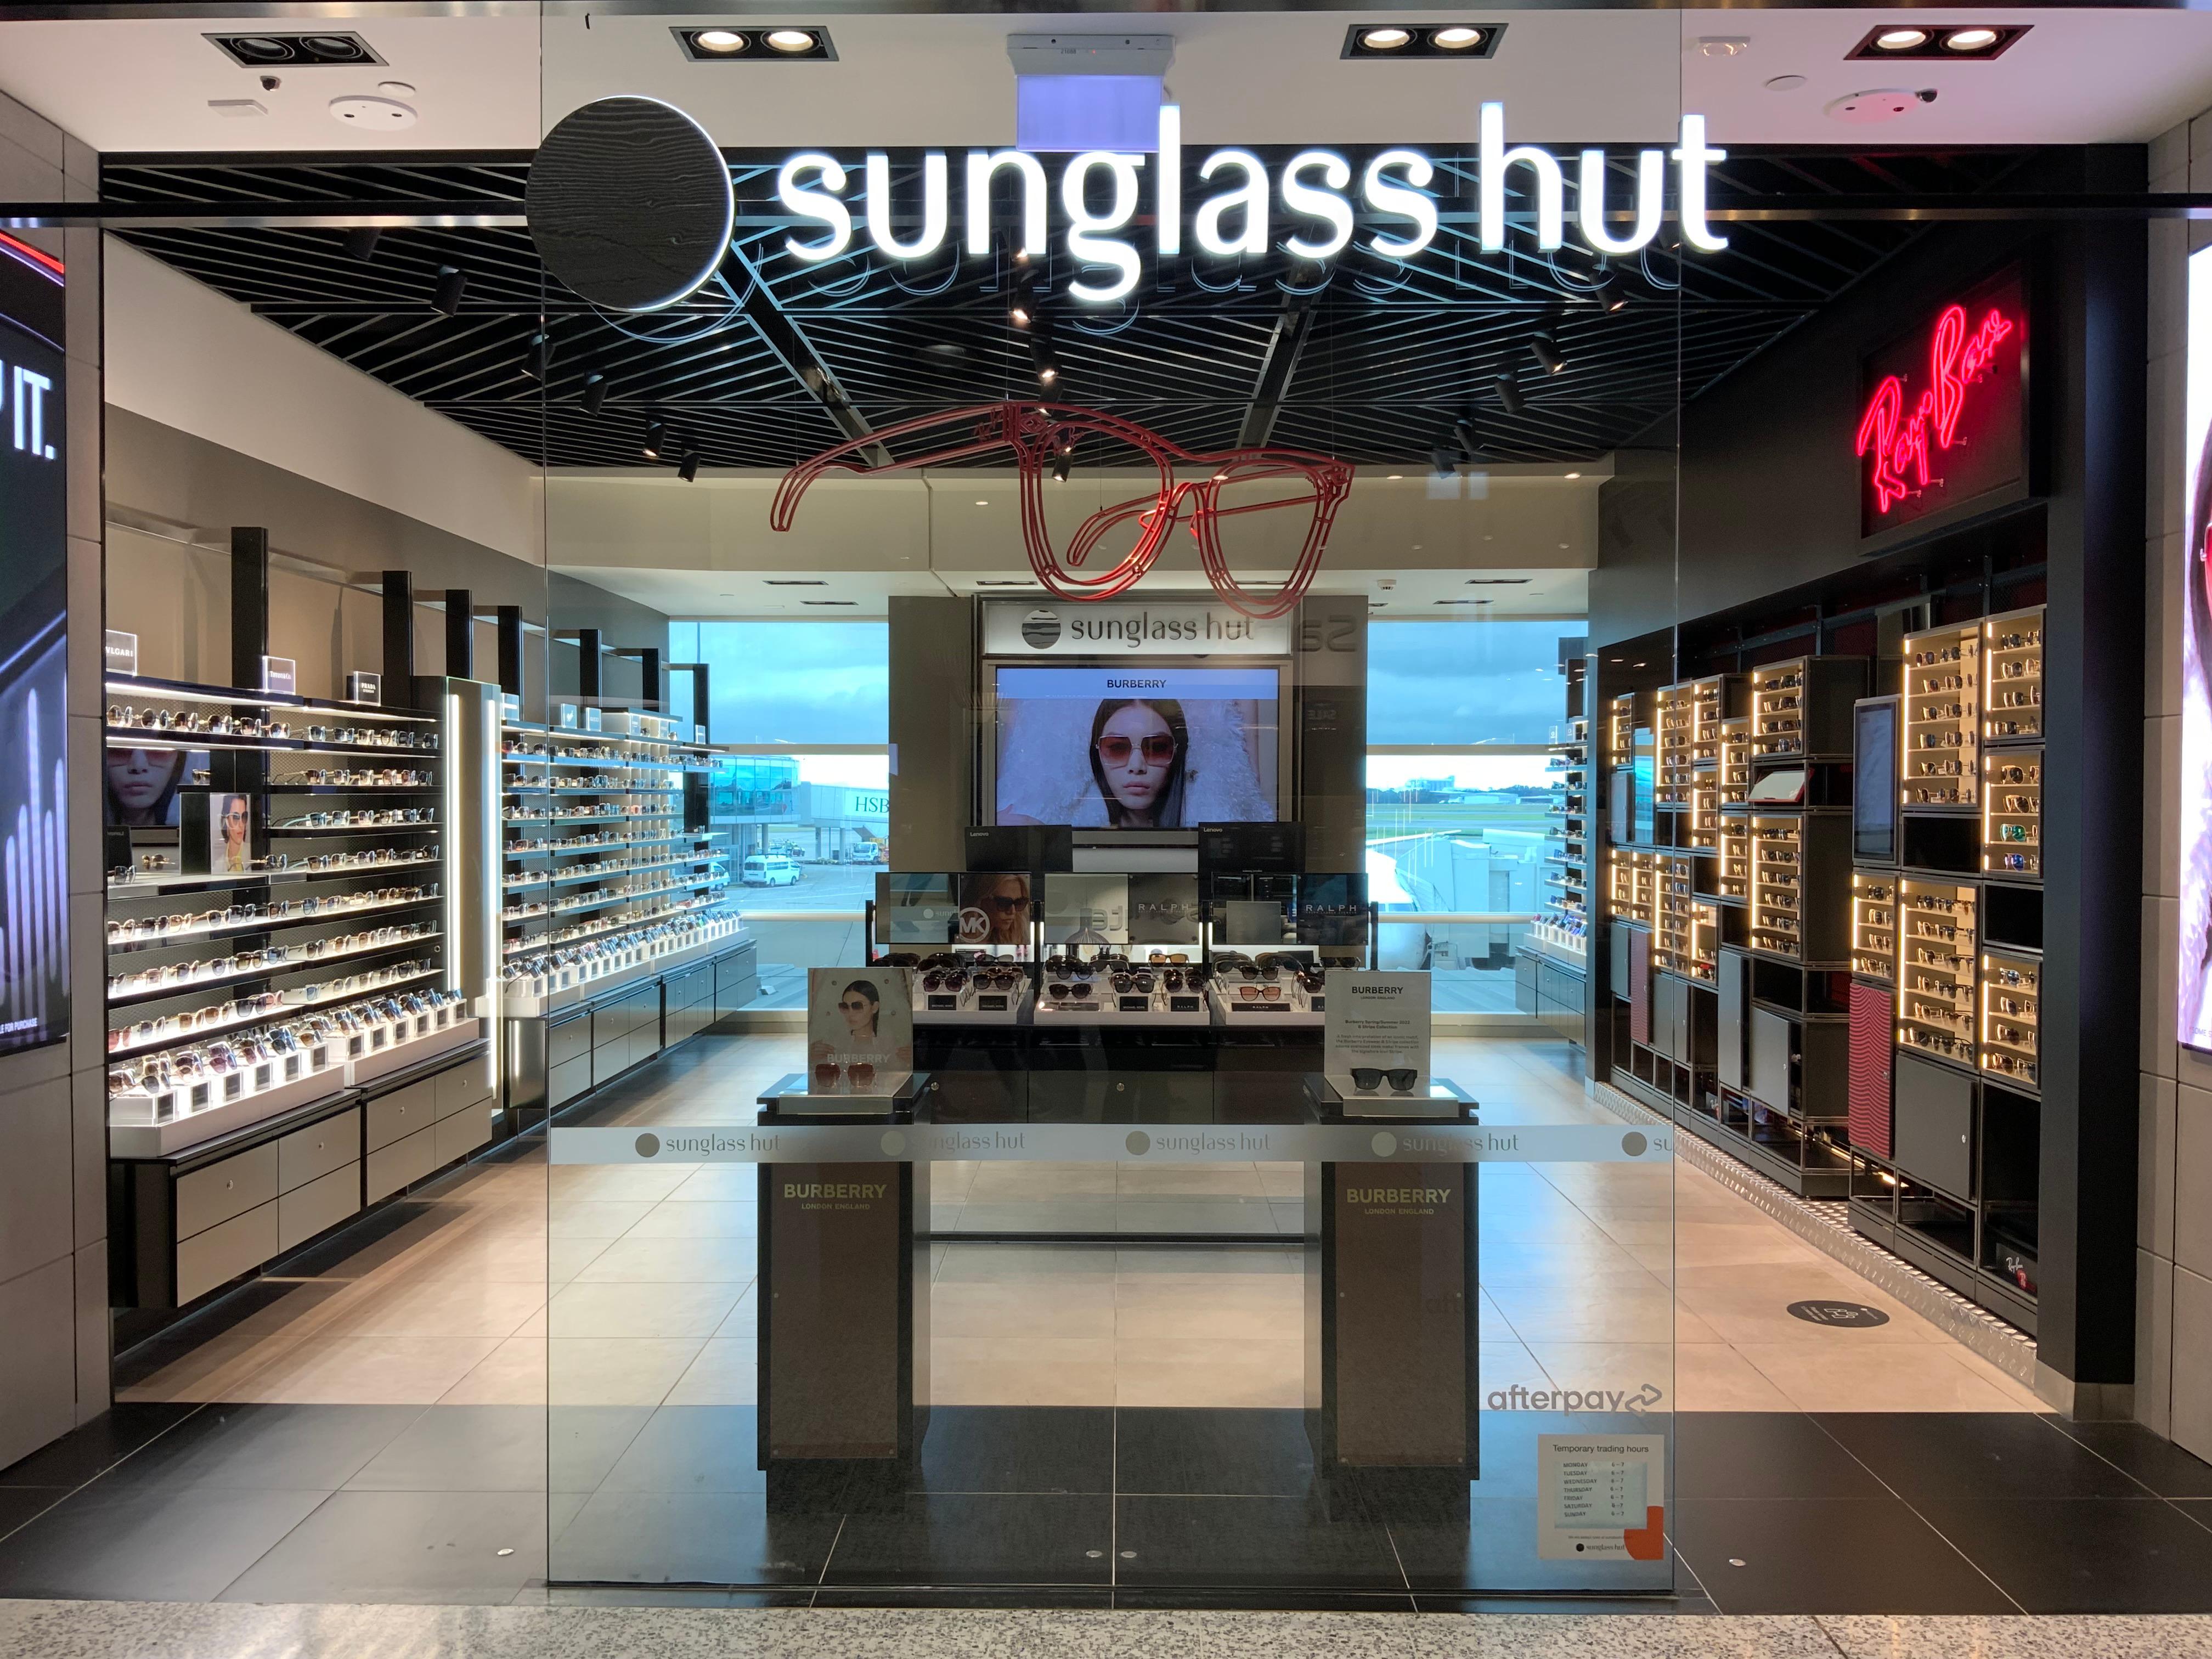 Just for you: up to $75 off your new sunglasses - Sunglass Hut